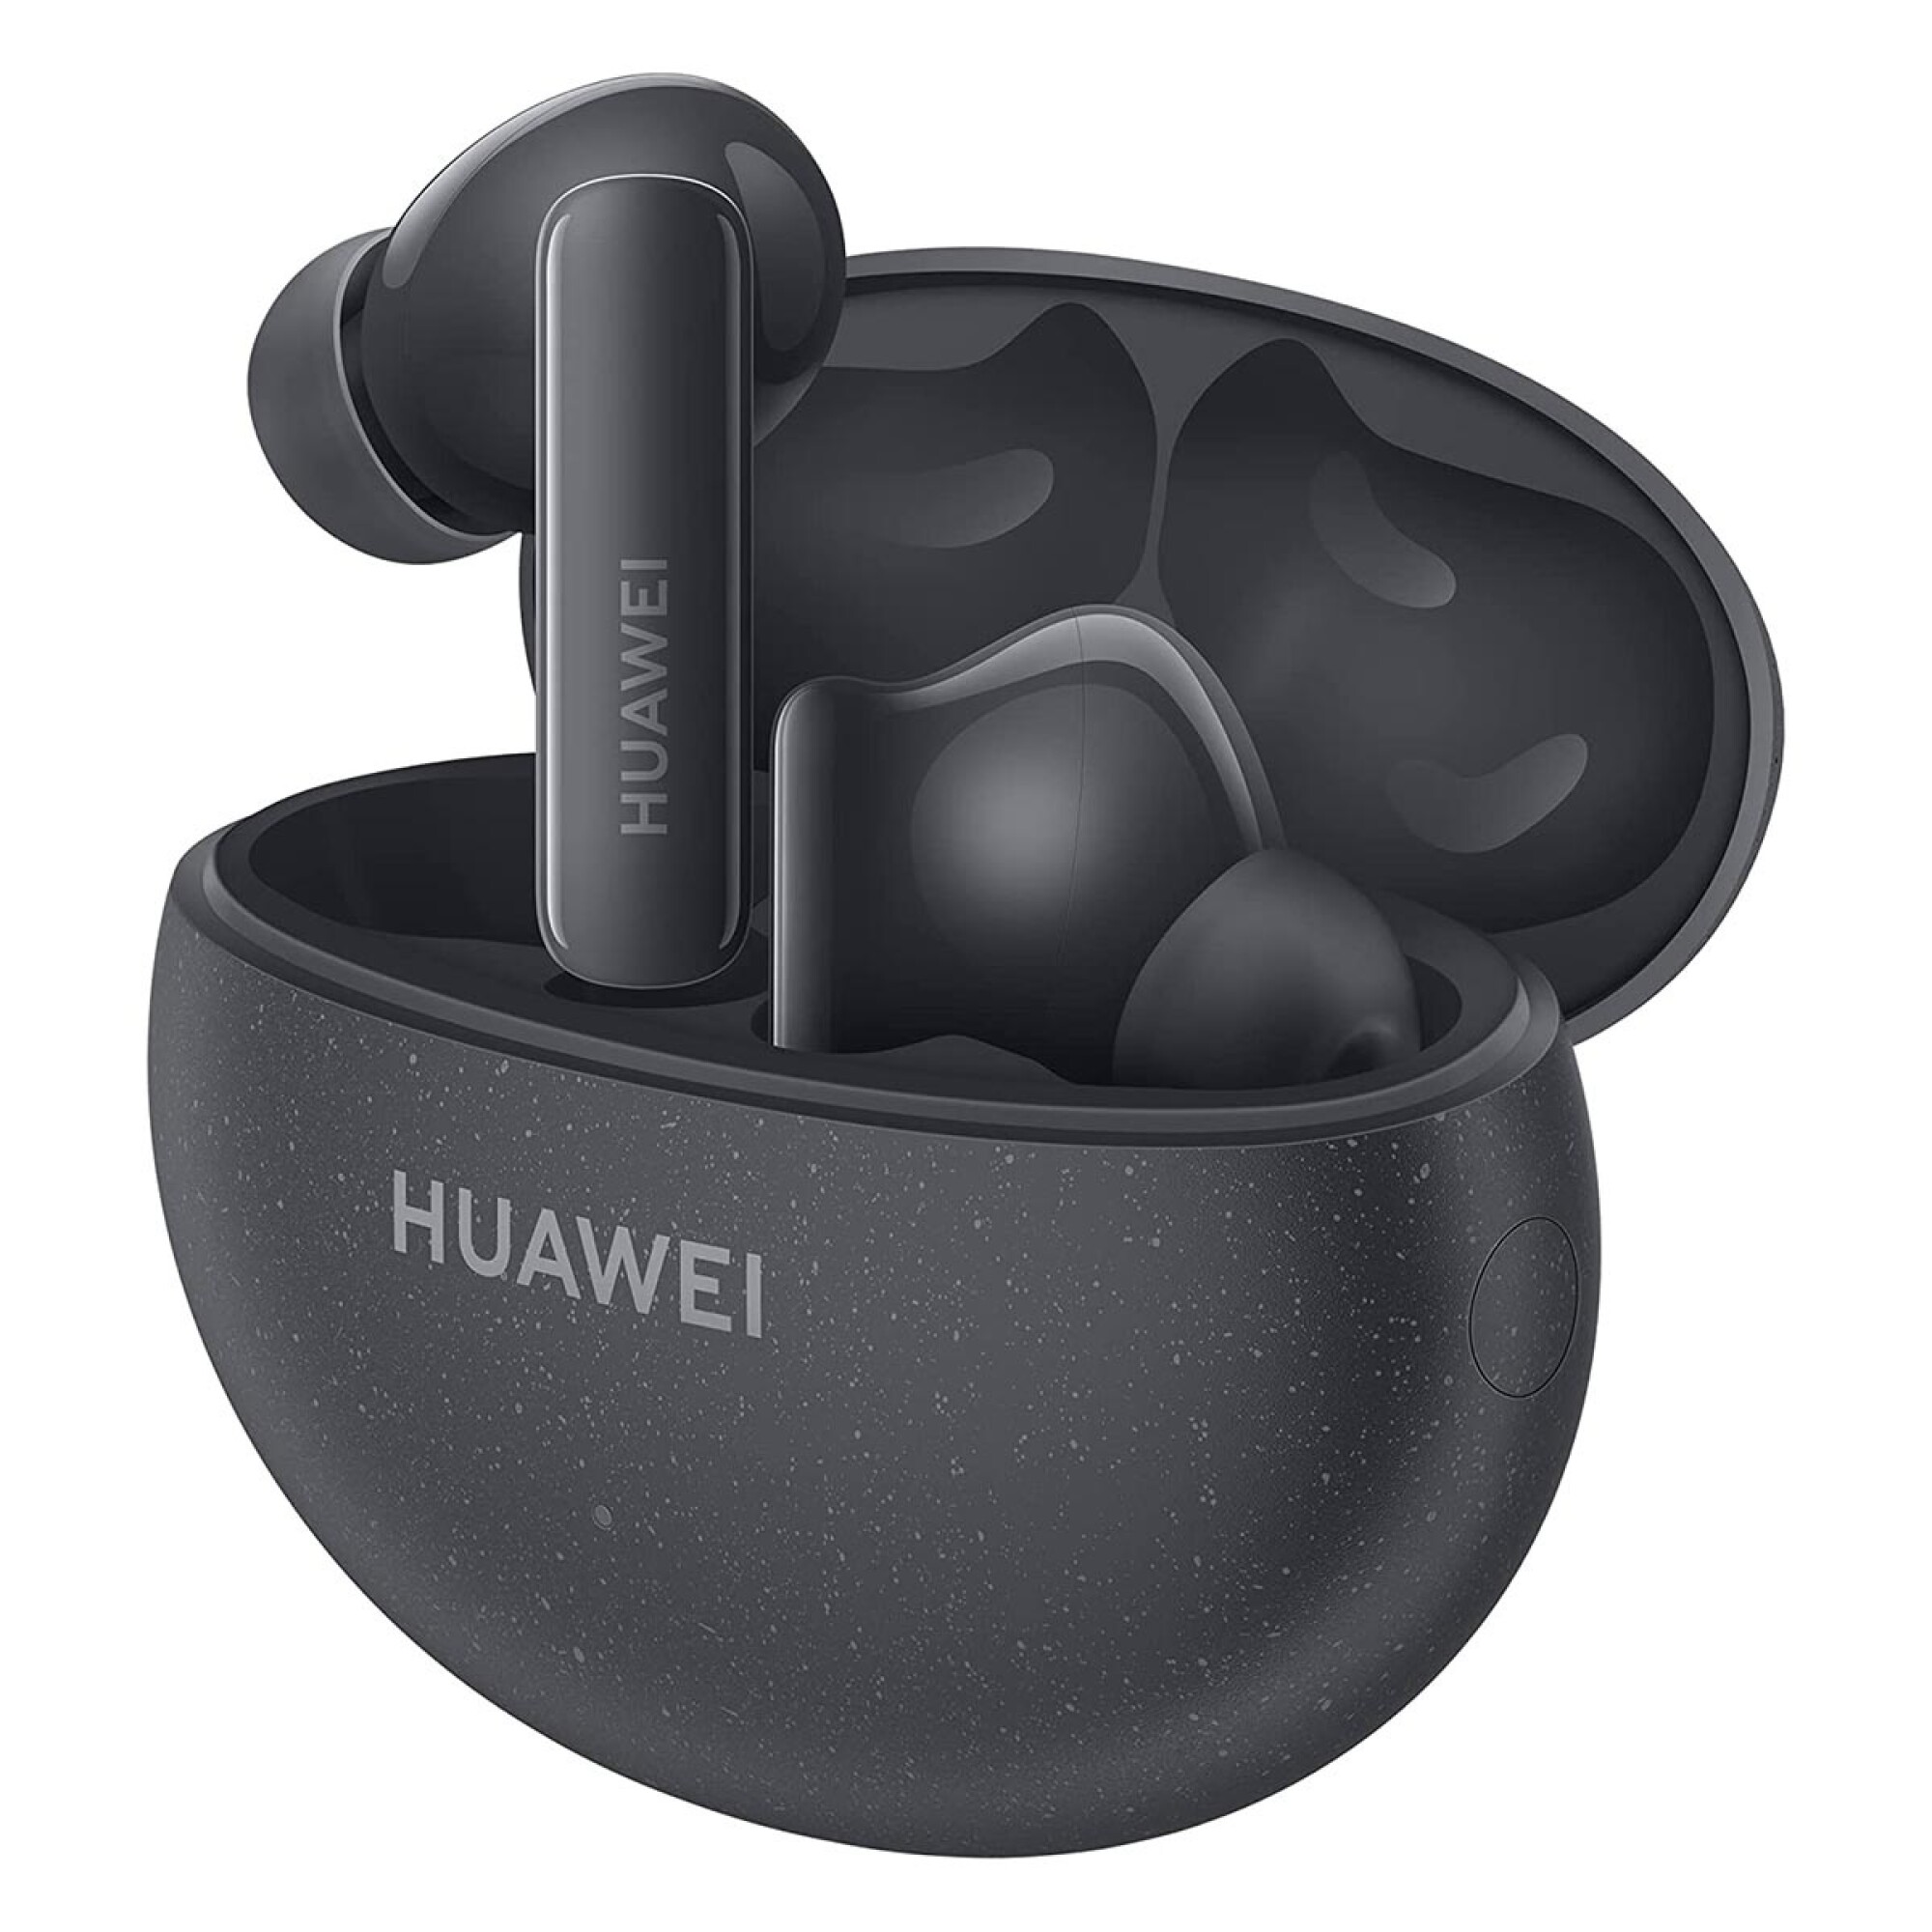 HUAWEI Auriculares inalámbricos Bluetooth Huawei Freelace Negro